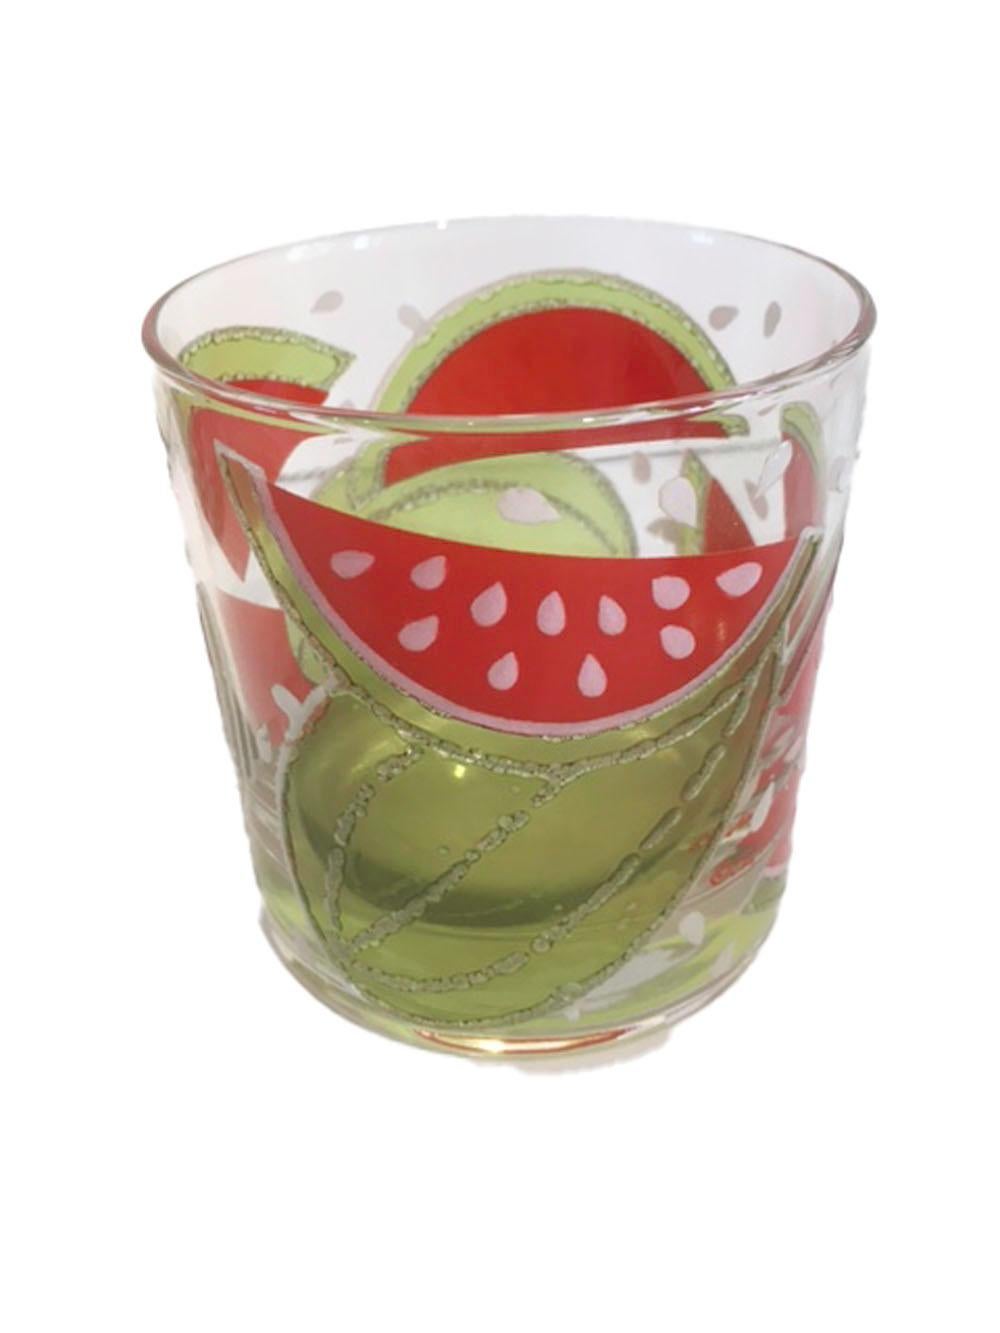 American Rare Vintage Culver Rocks Glasses with Watermelon Design in Translucent Enamels